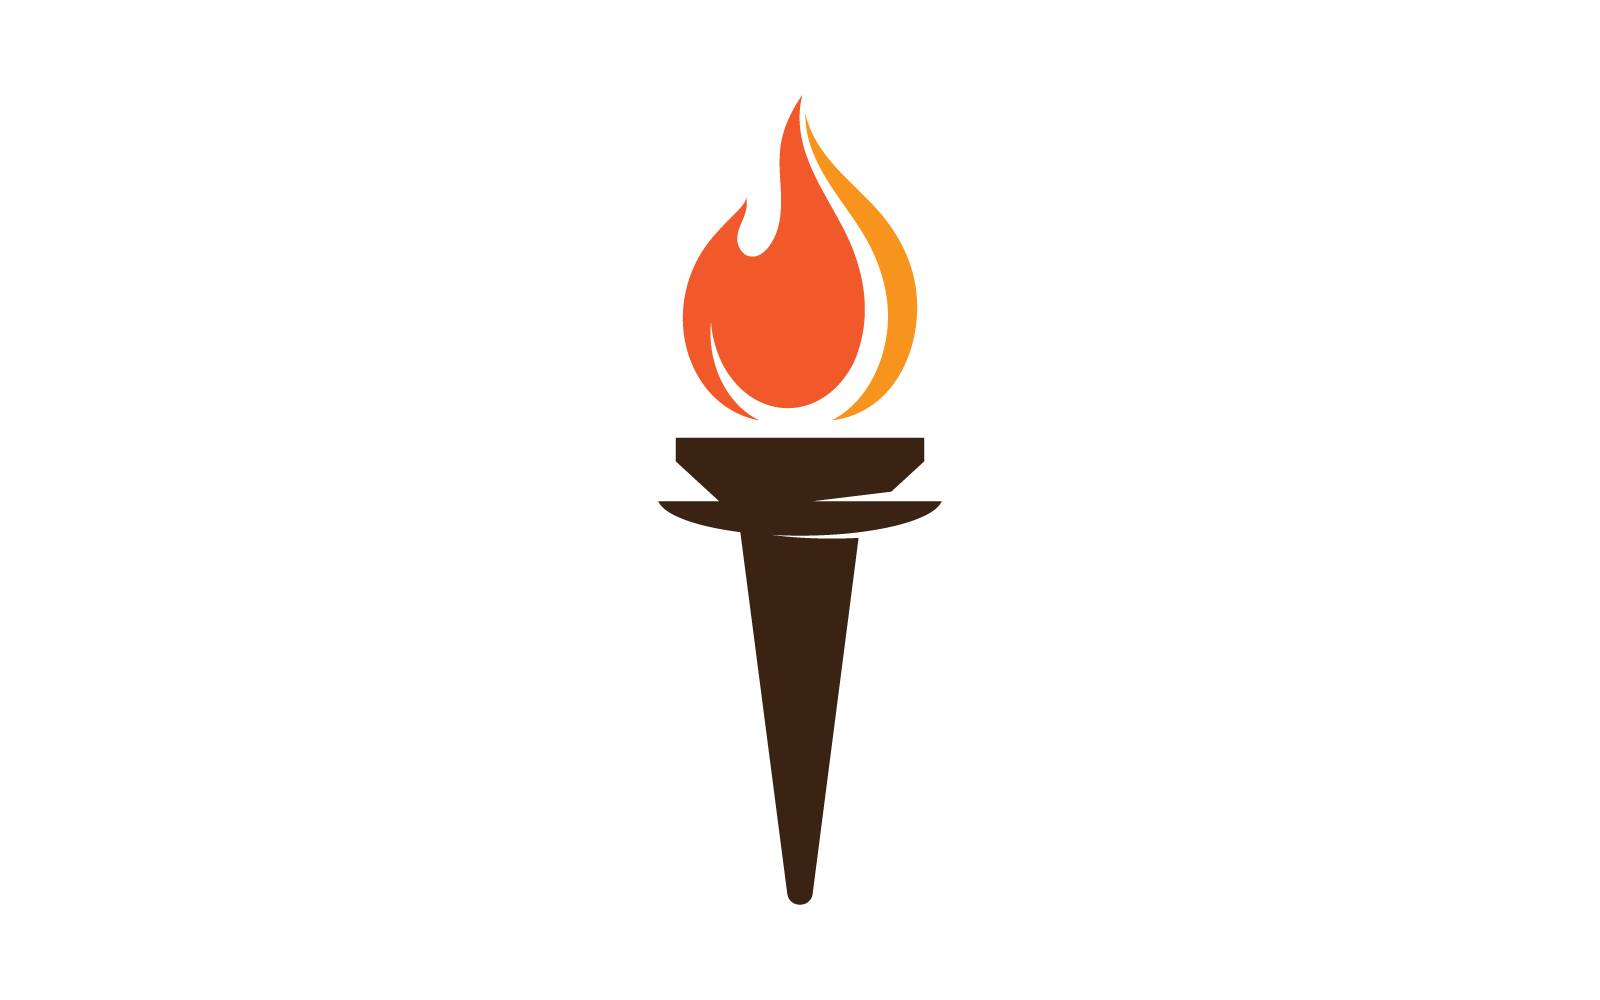 Illustration of torch fire icon template flat design